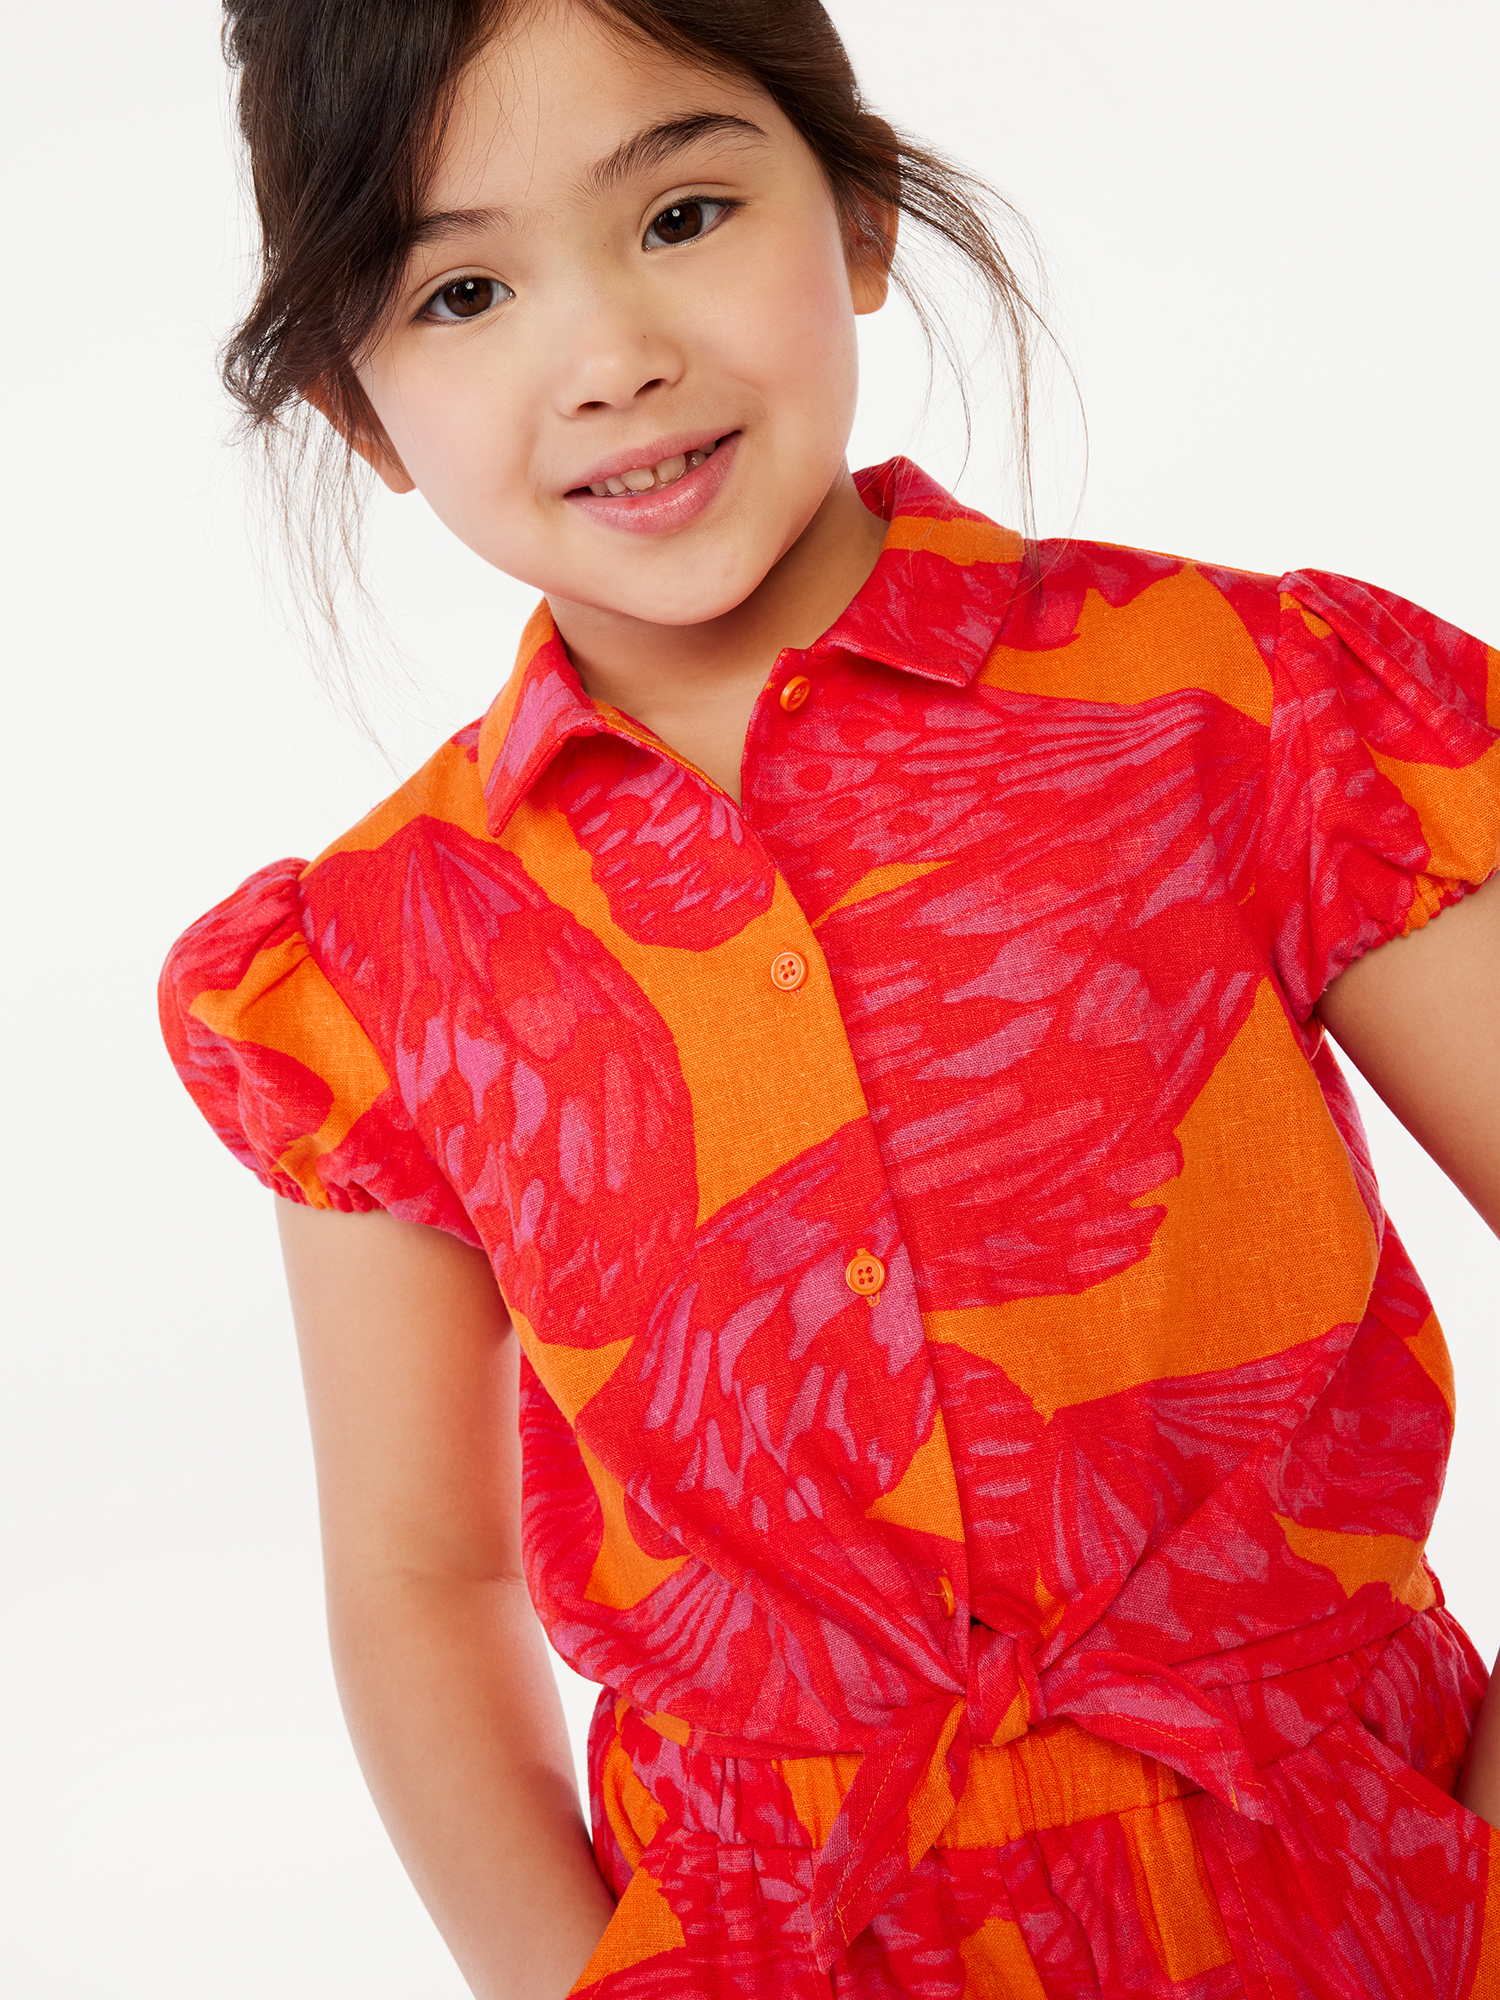 Scoop Girls Short Sleeve Linen Blend Shirt with Tie Front, Sizes 4-16 - image 4 of 5